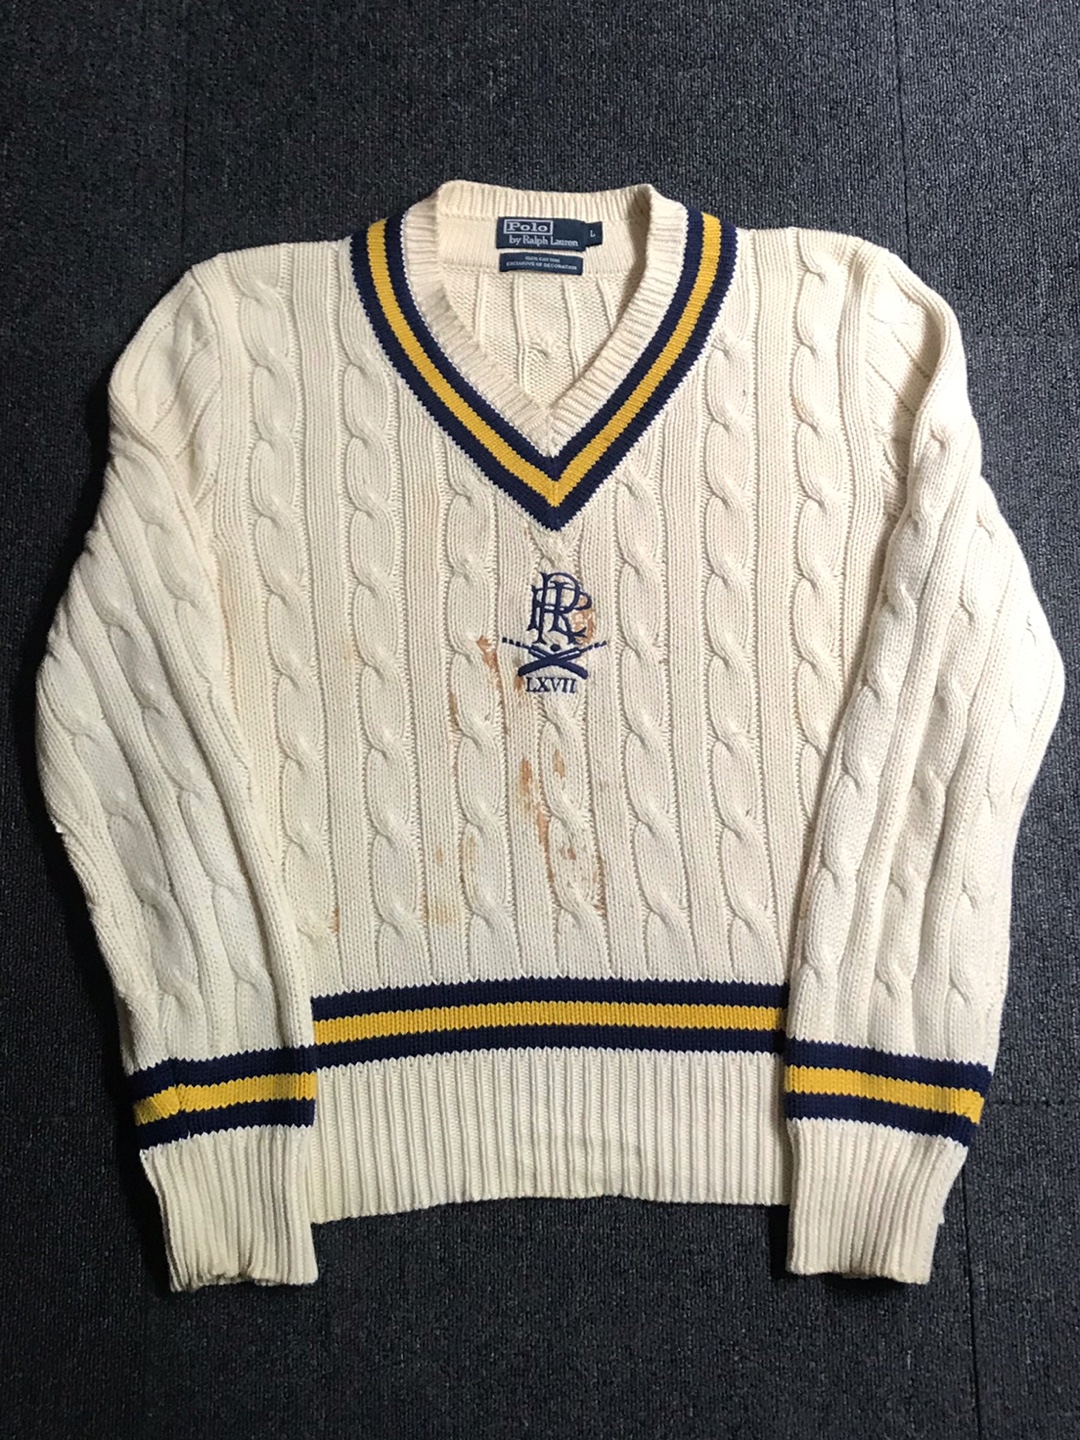 Polo RL stains cotton cricket sweater (L size, ~105 추천)